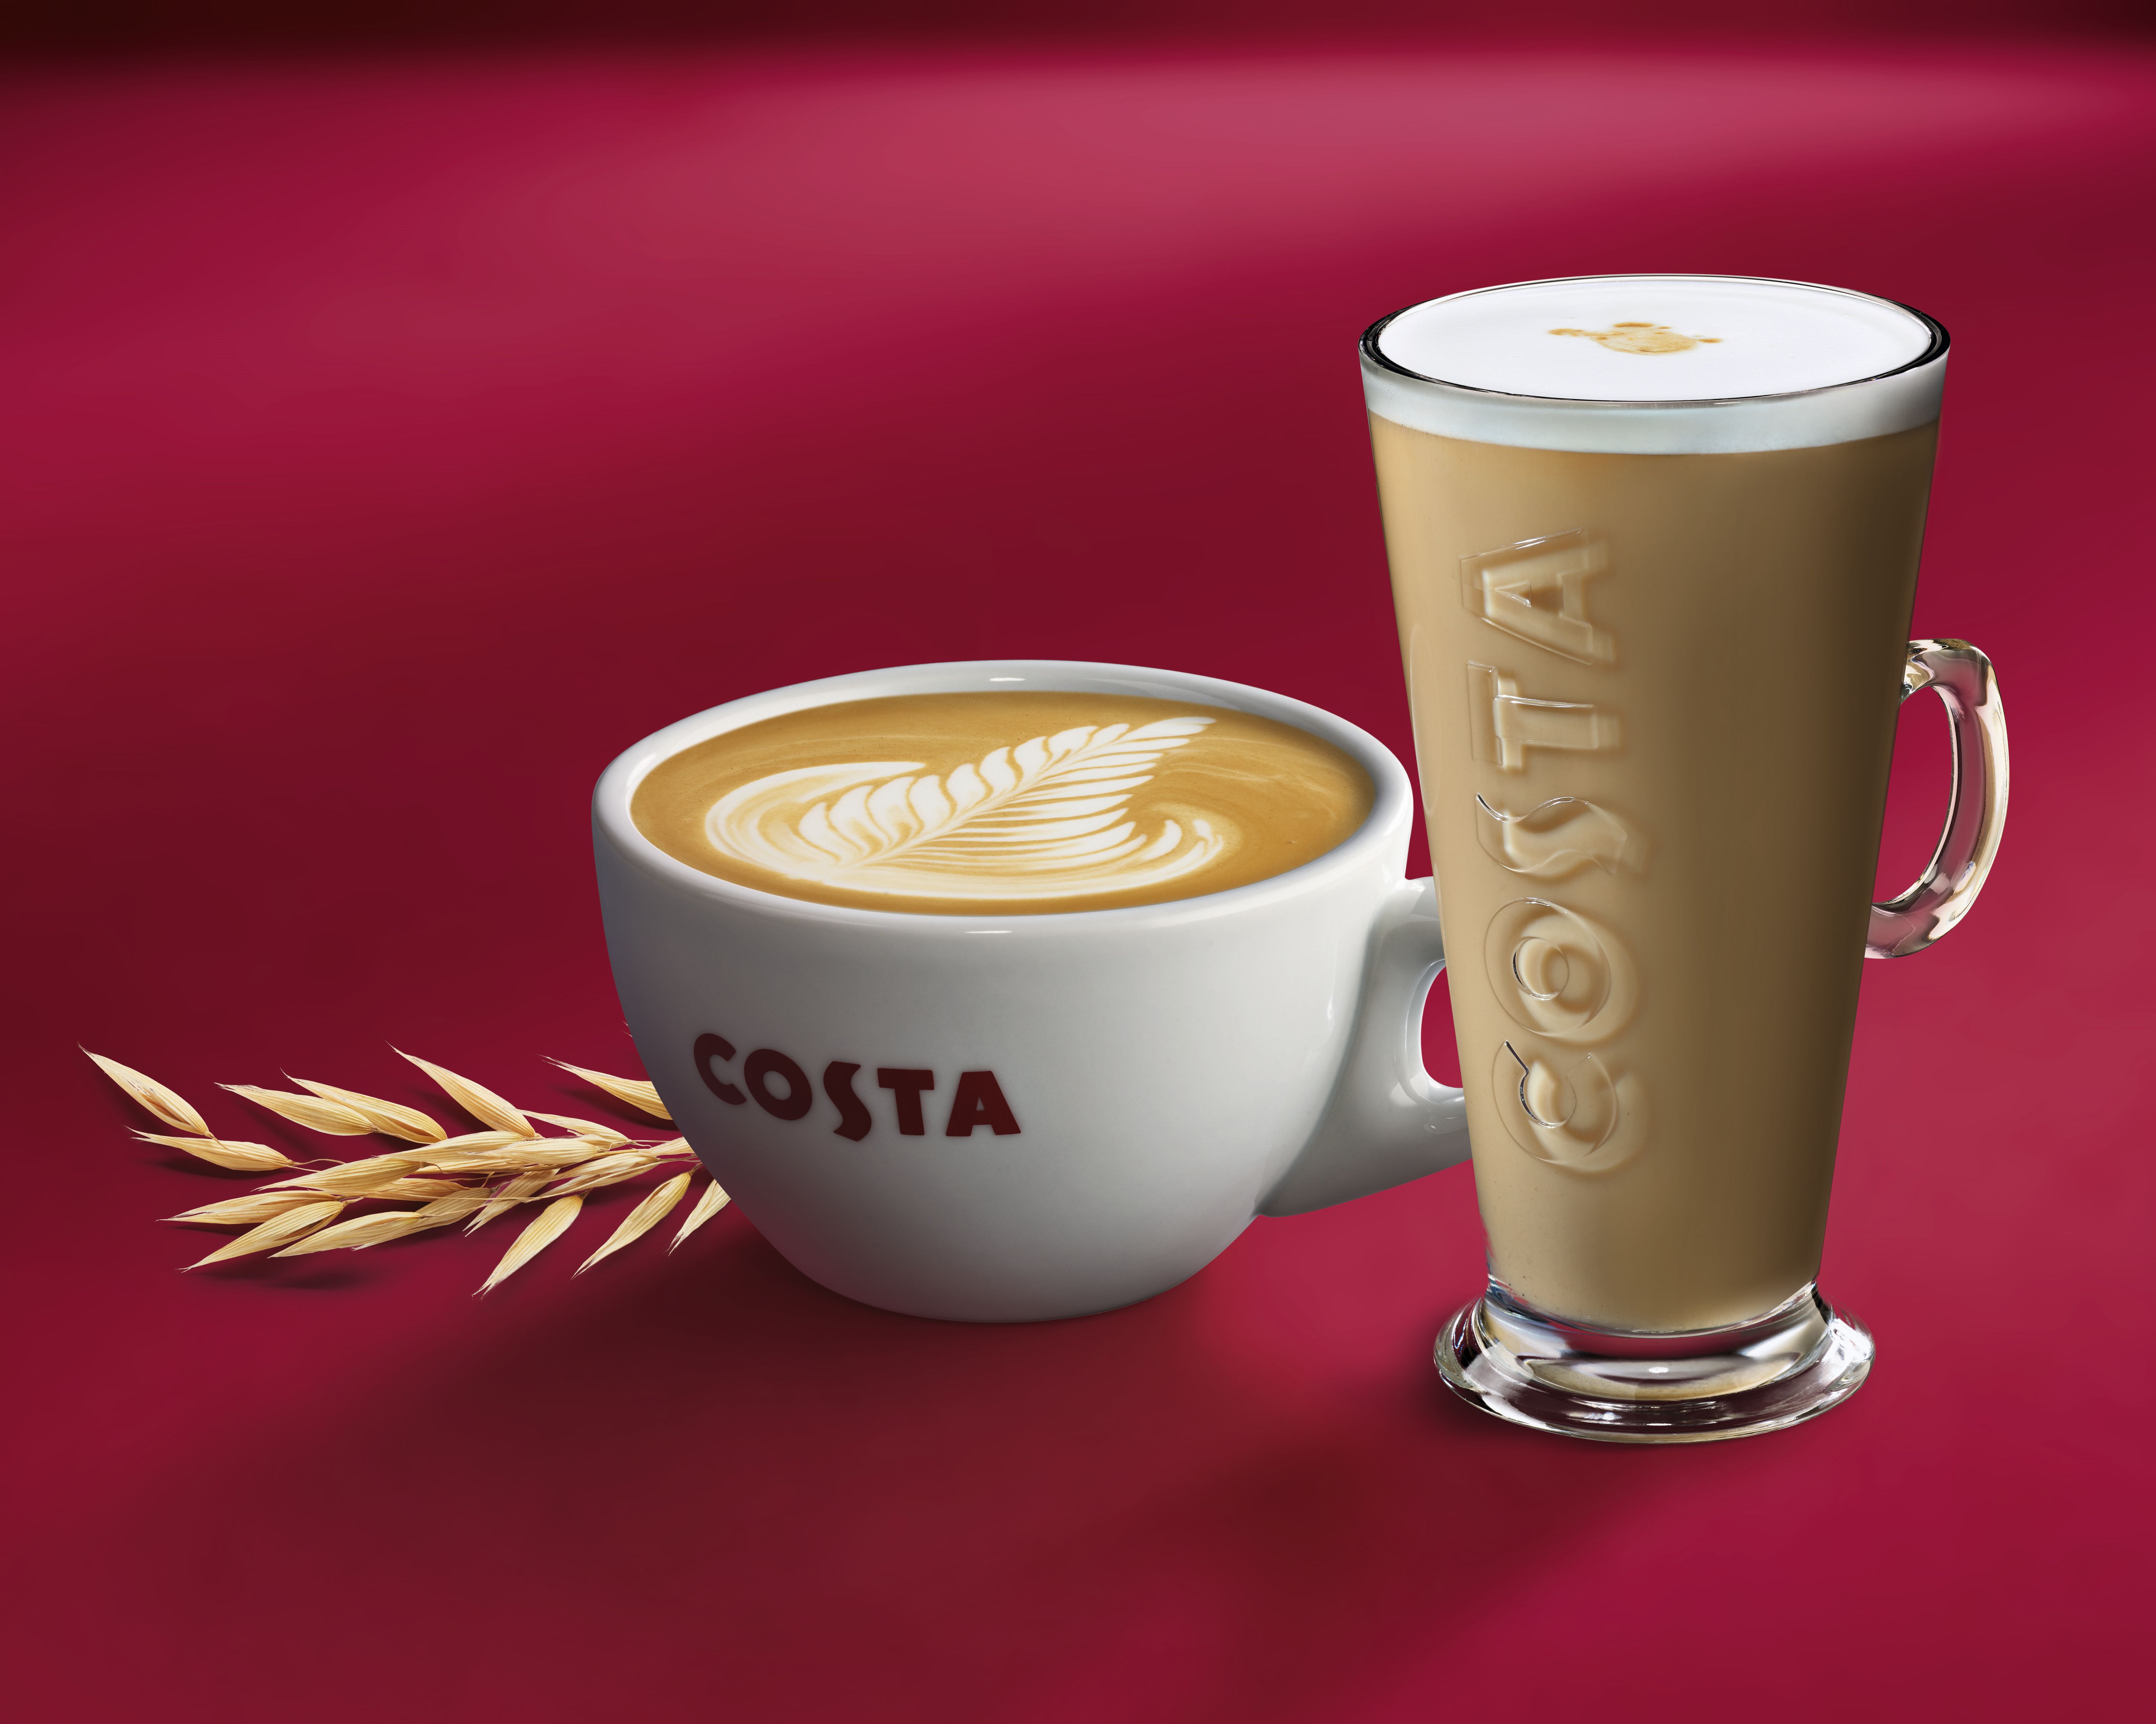 File:Cup of Costa Coffee.jpg - Wikimedia Commons